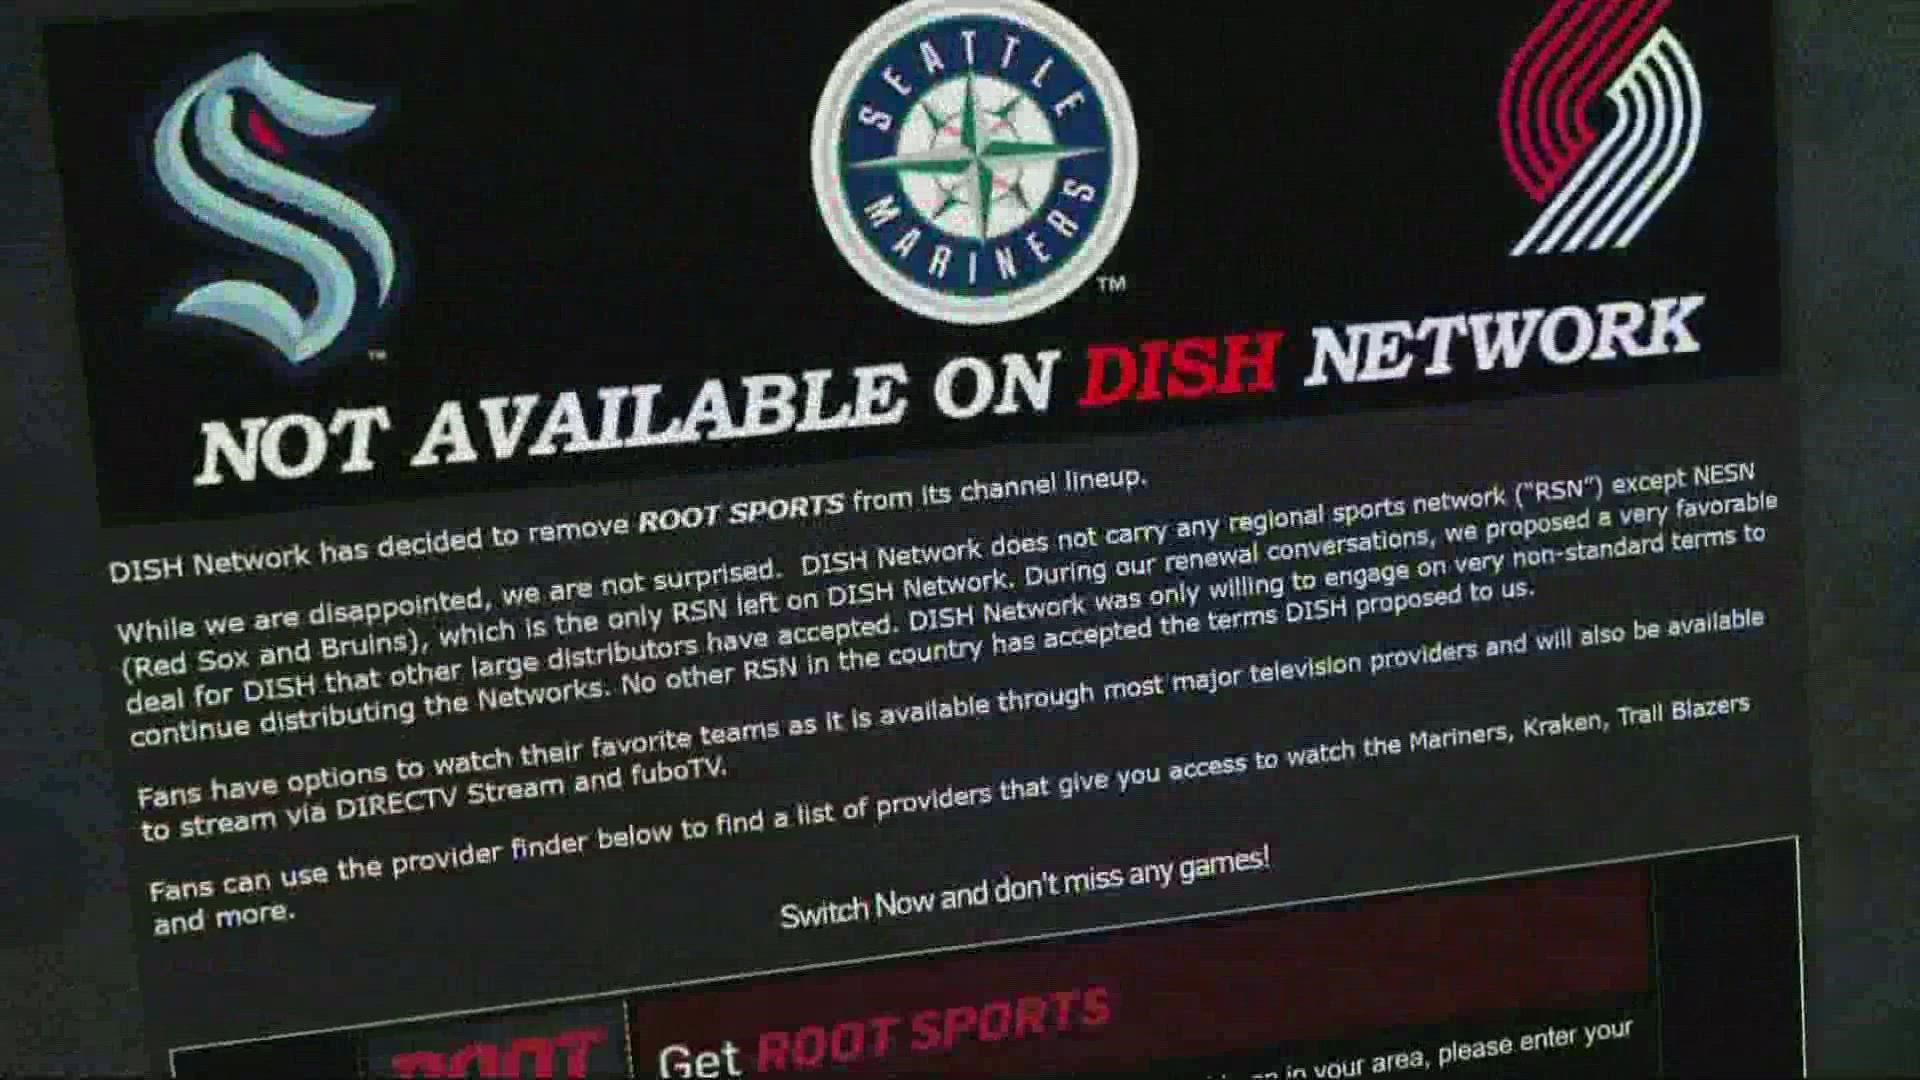 Blazers fans face lack of streaming options to watch games kgw